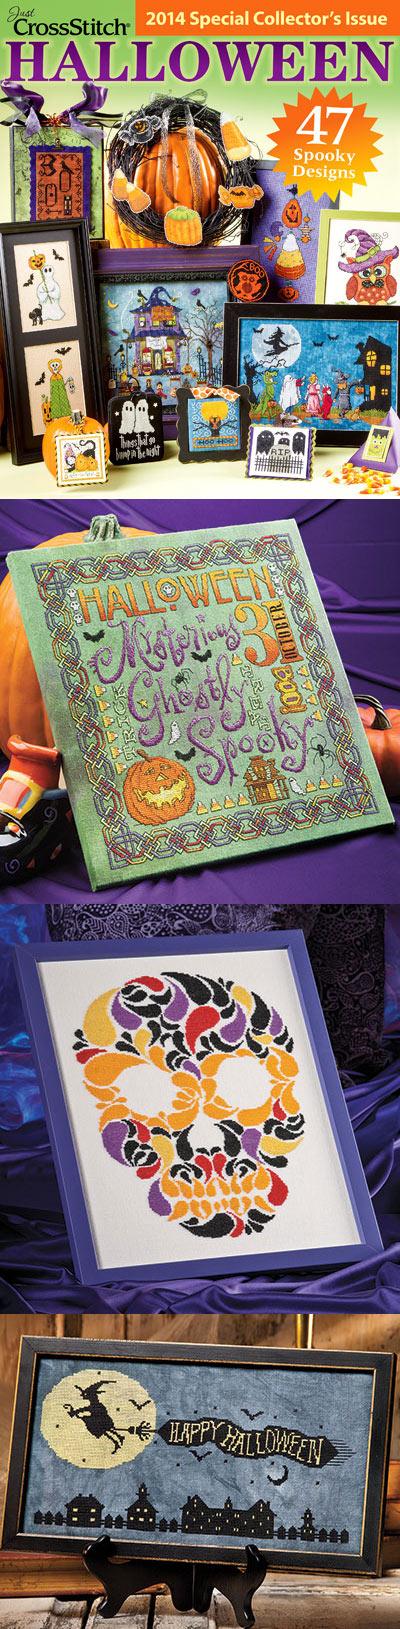 Just Cross Stitch 2014 Halloween Special Collector's Issue Cross Stitch Magazine